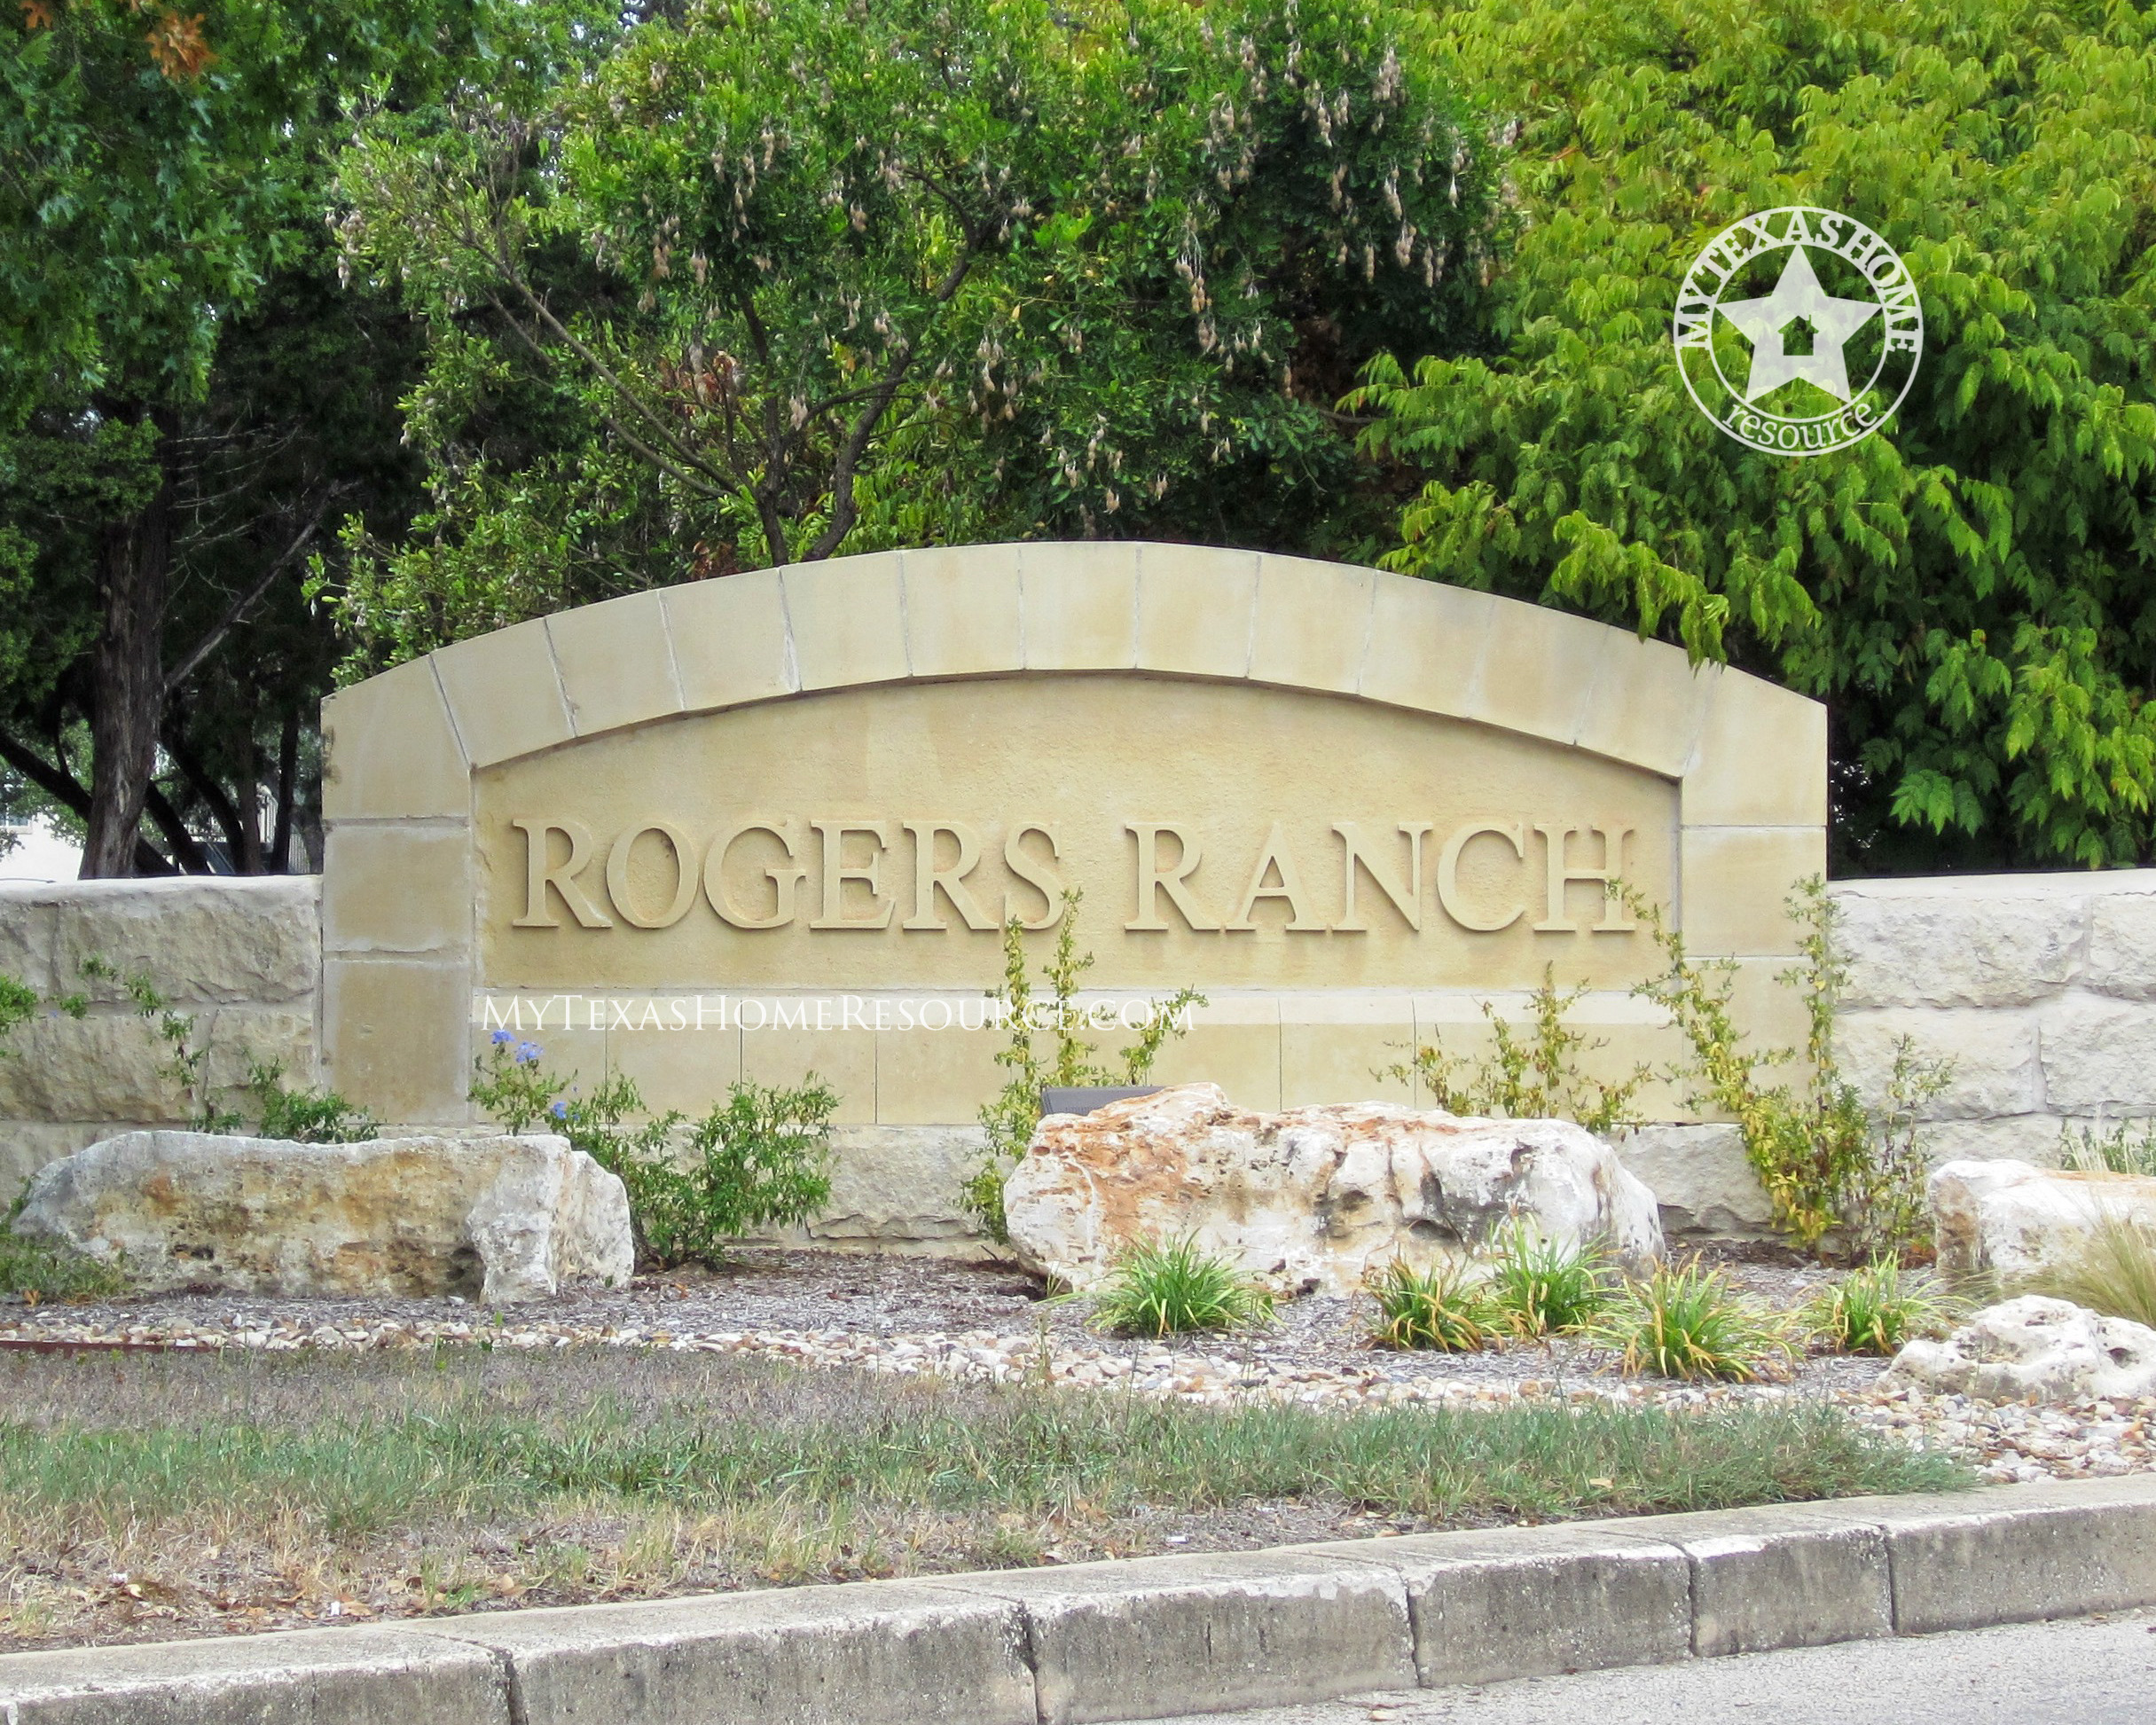 Rogers Ranch Homes For Sale Rogers Ranch San Antonio Tx Real Estate